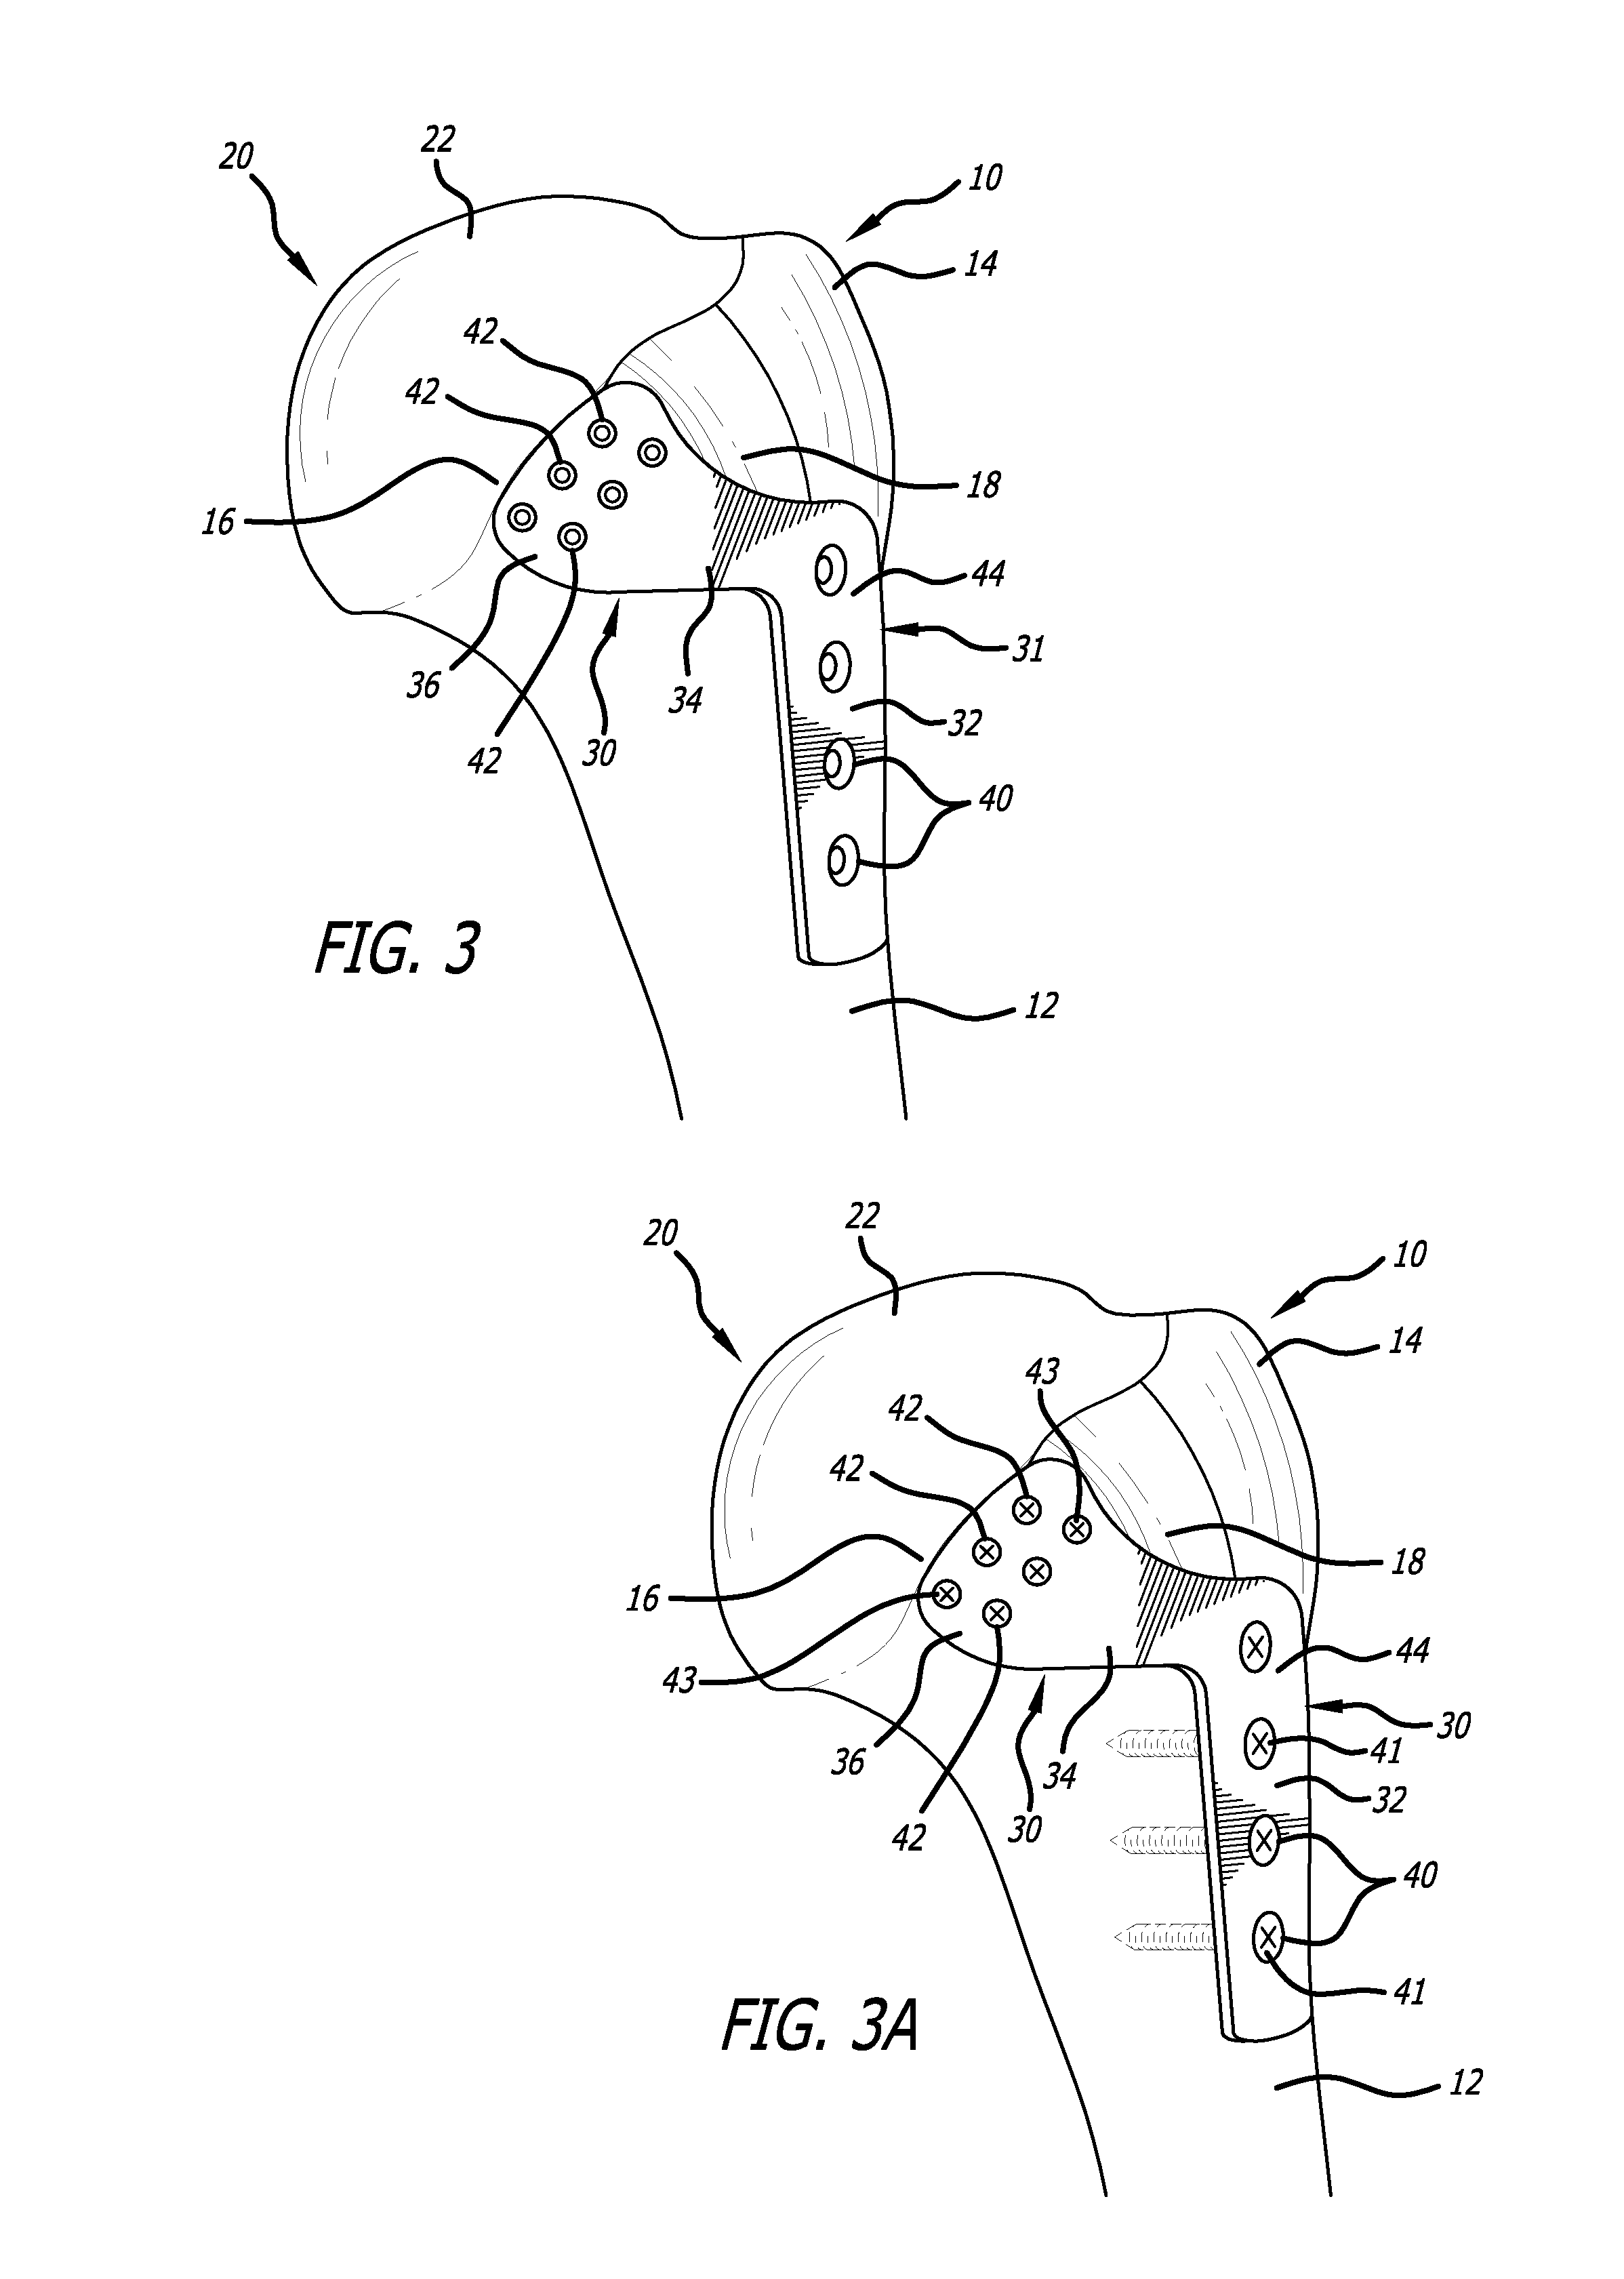 Anterior lesser tuberosity fixed angle fixation device and method of use associated therewith